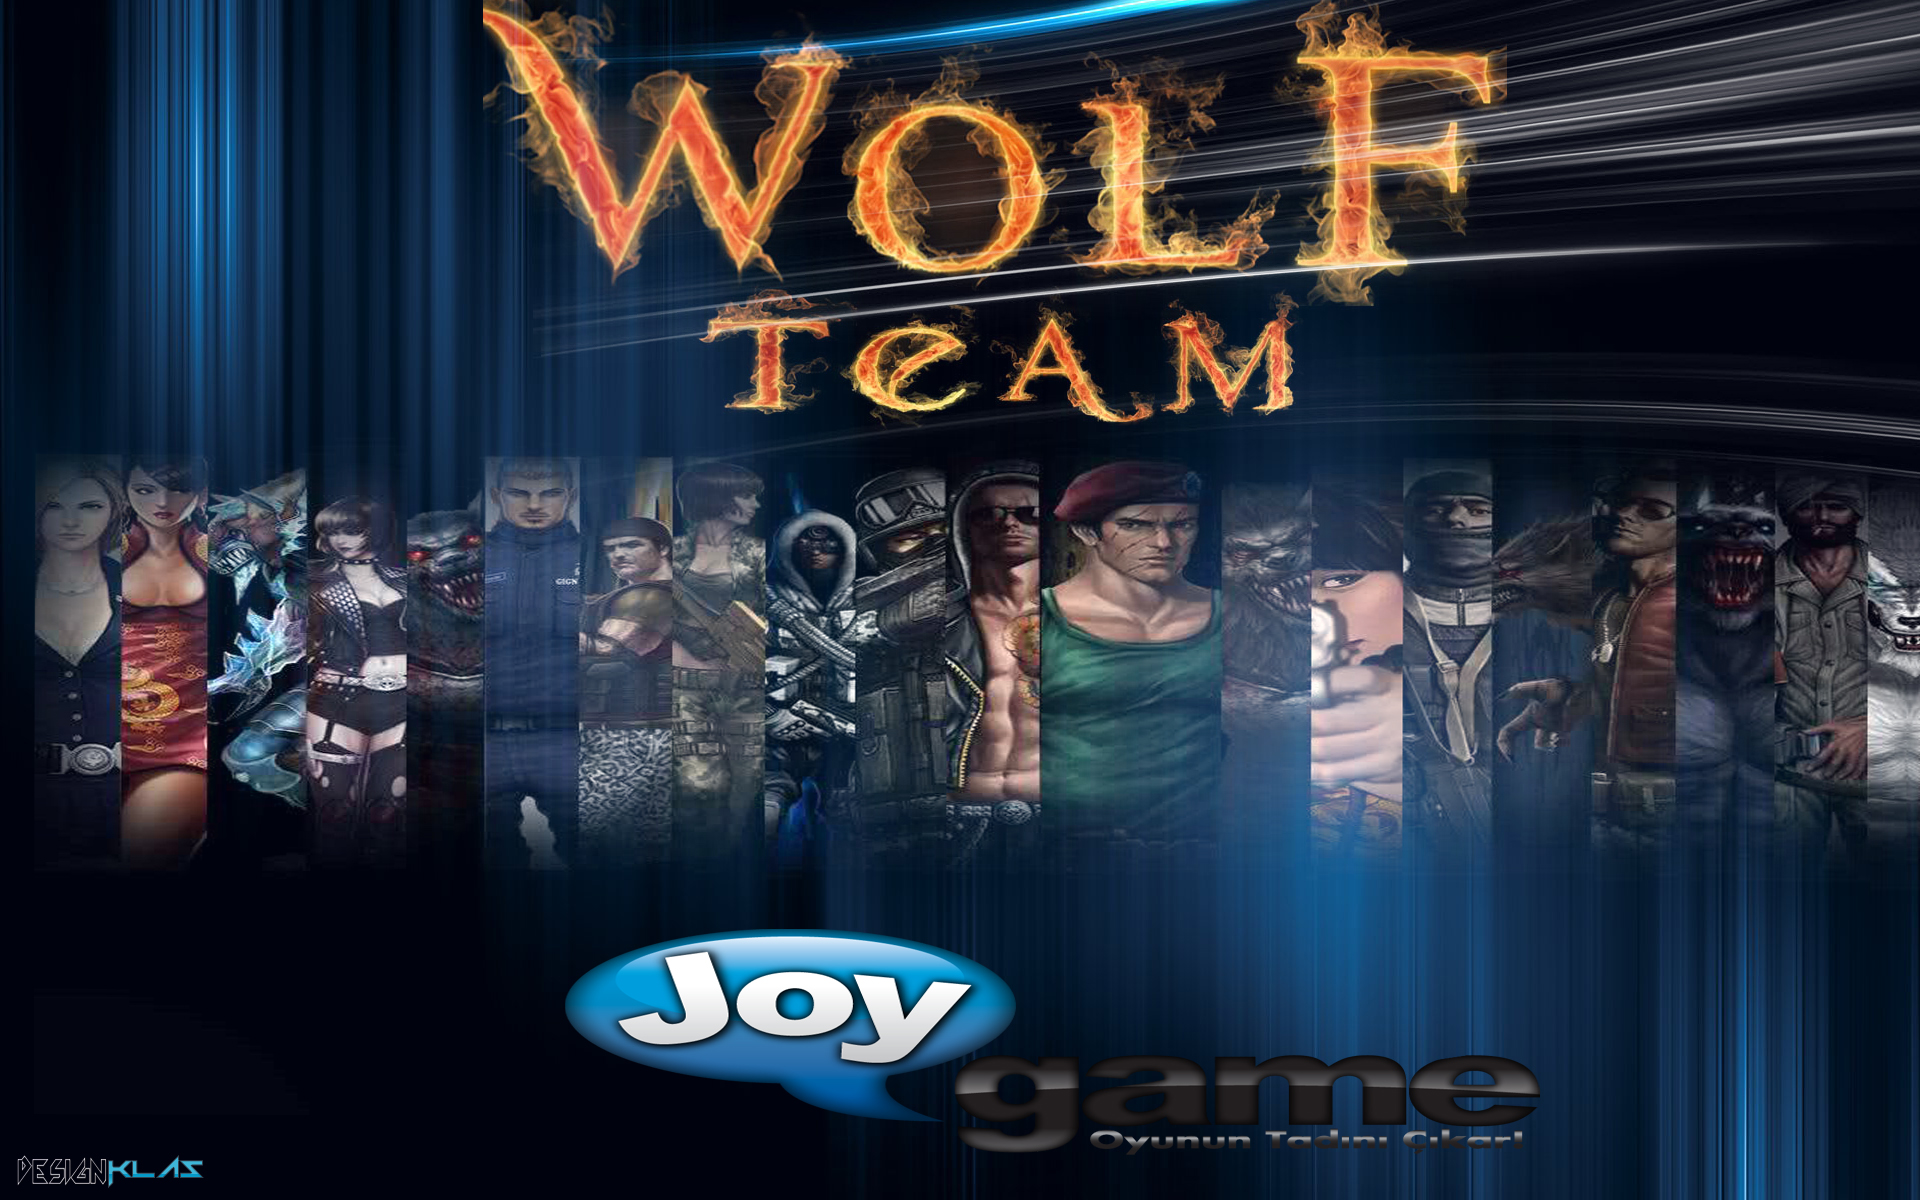 HQ Wolfteam Wallpaper. Full HD Picture